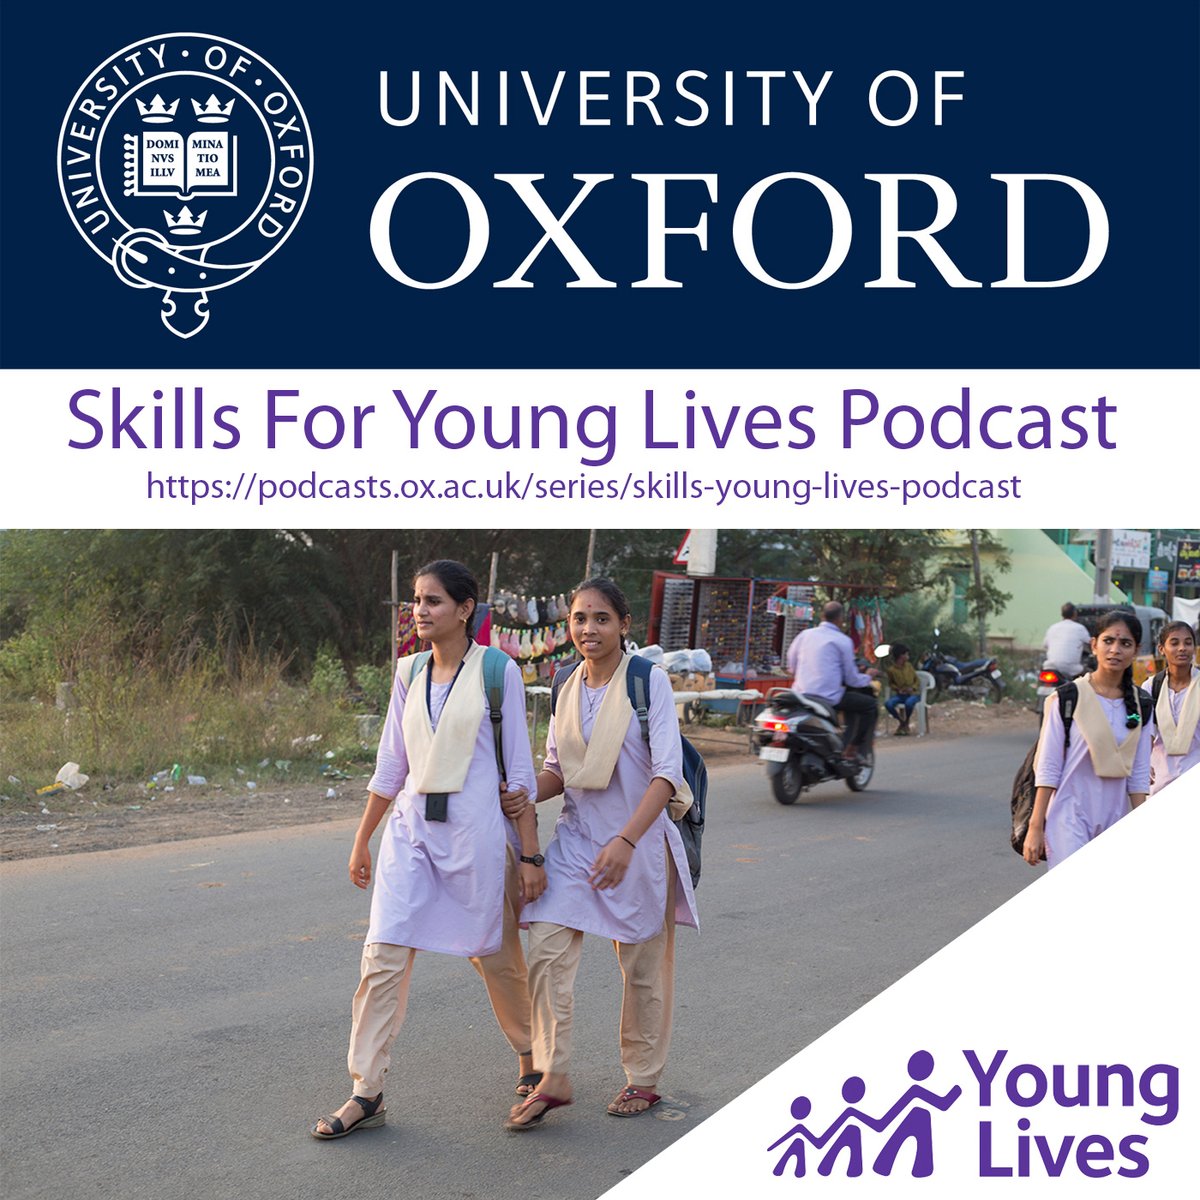 Episode 1 of our 'Skills for Young Lives Podcast' is all about social & emotional skills in the Global South. Tune in here shorturl.at/owAGV to find out more. @RTI_INTL_DEV @matthewchjukes in conversation with @EconCath on culture, change & what policies & progs help.